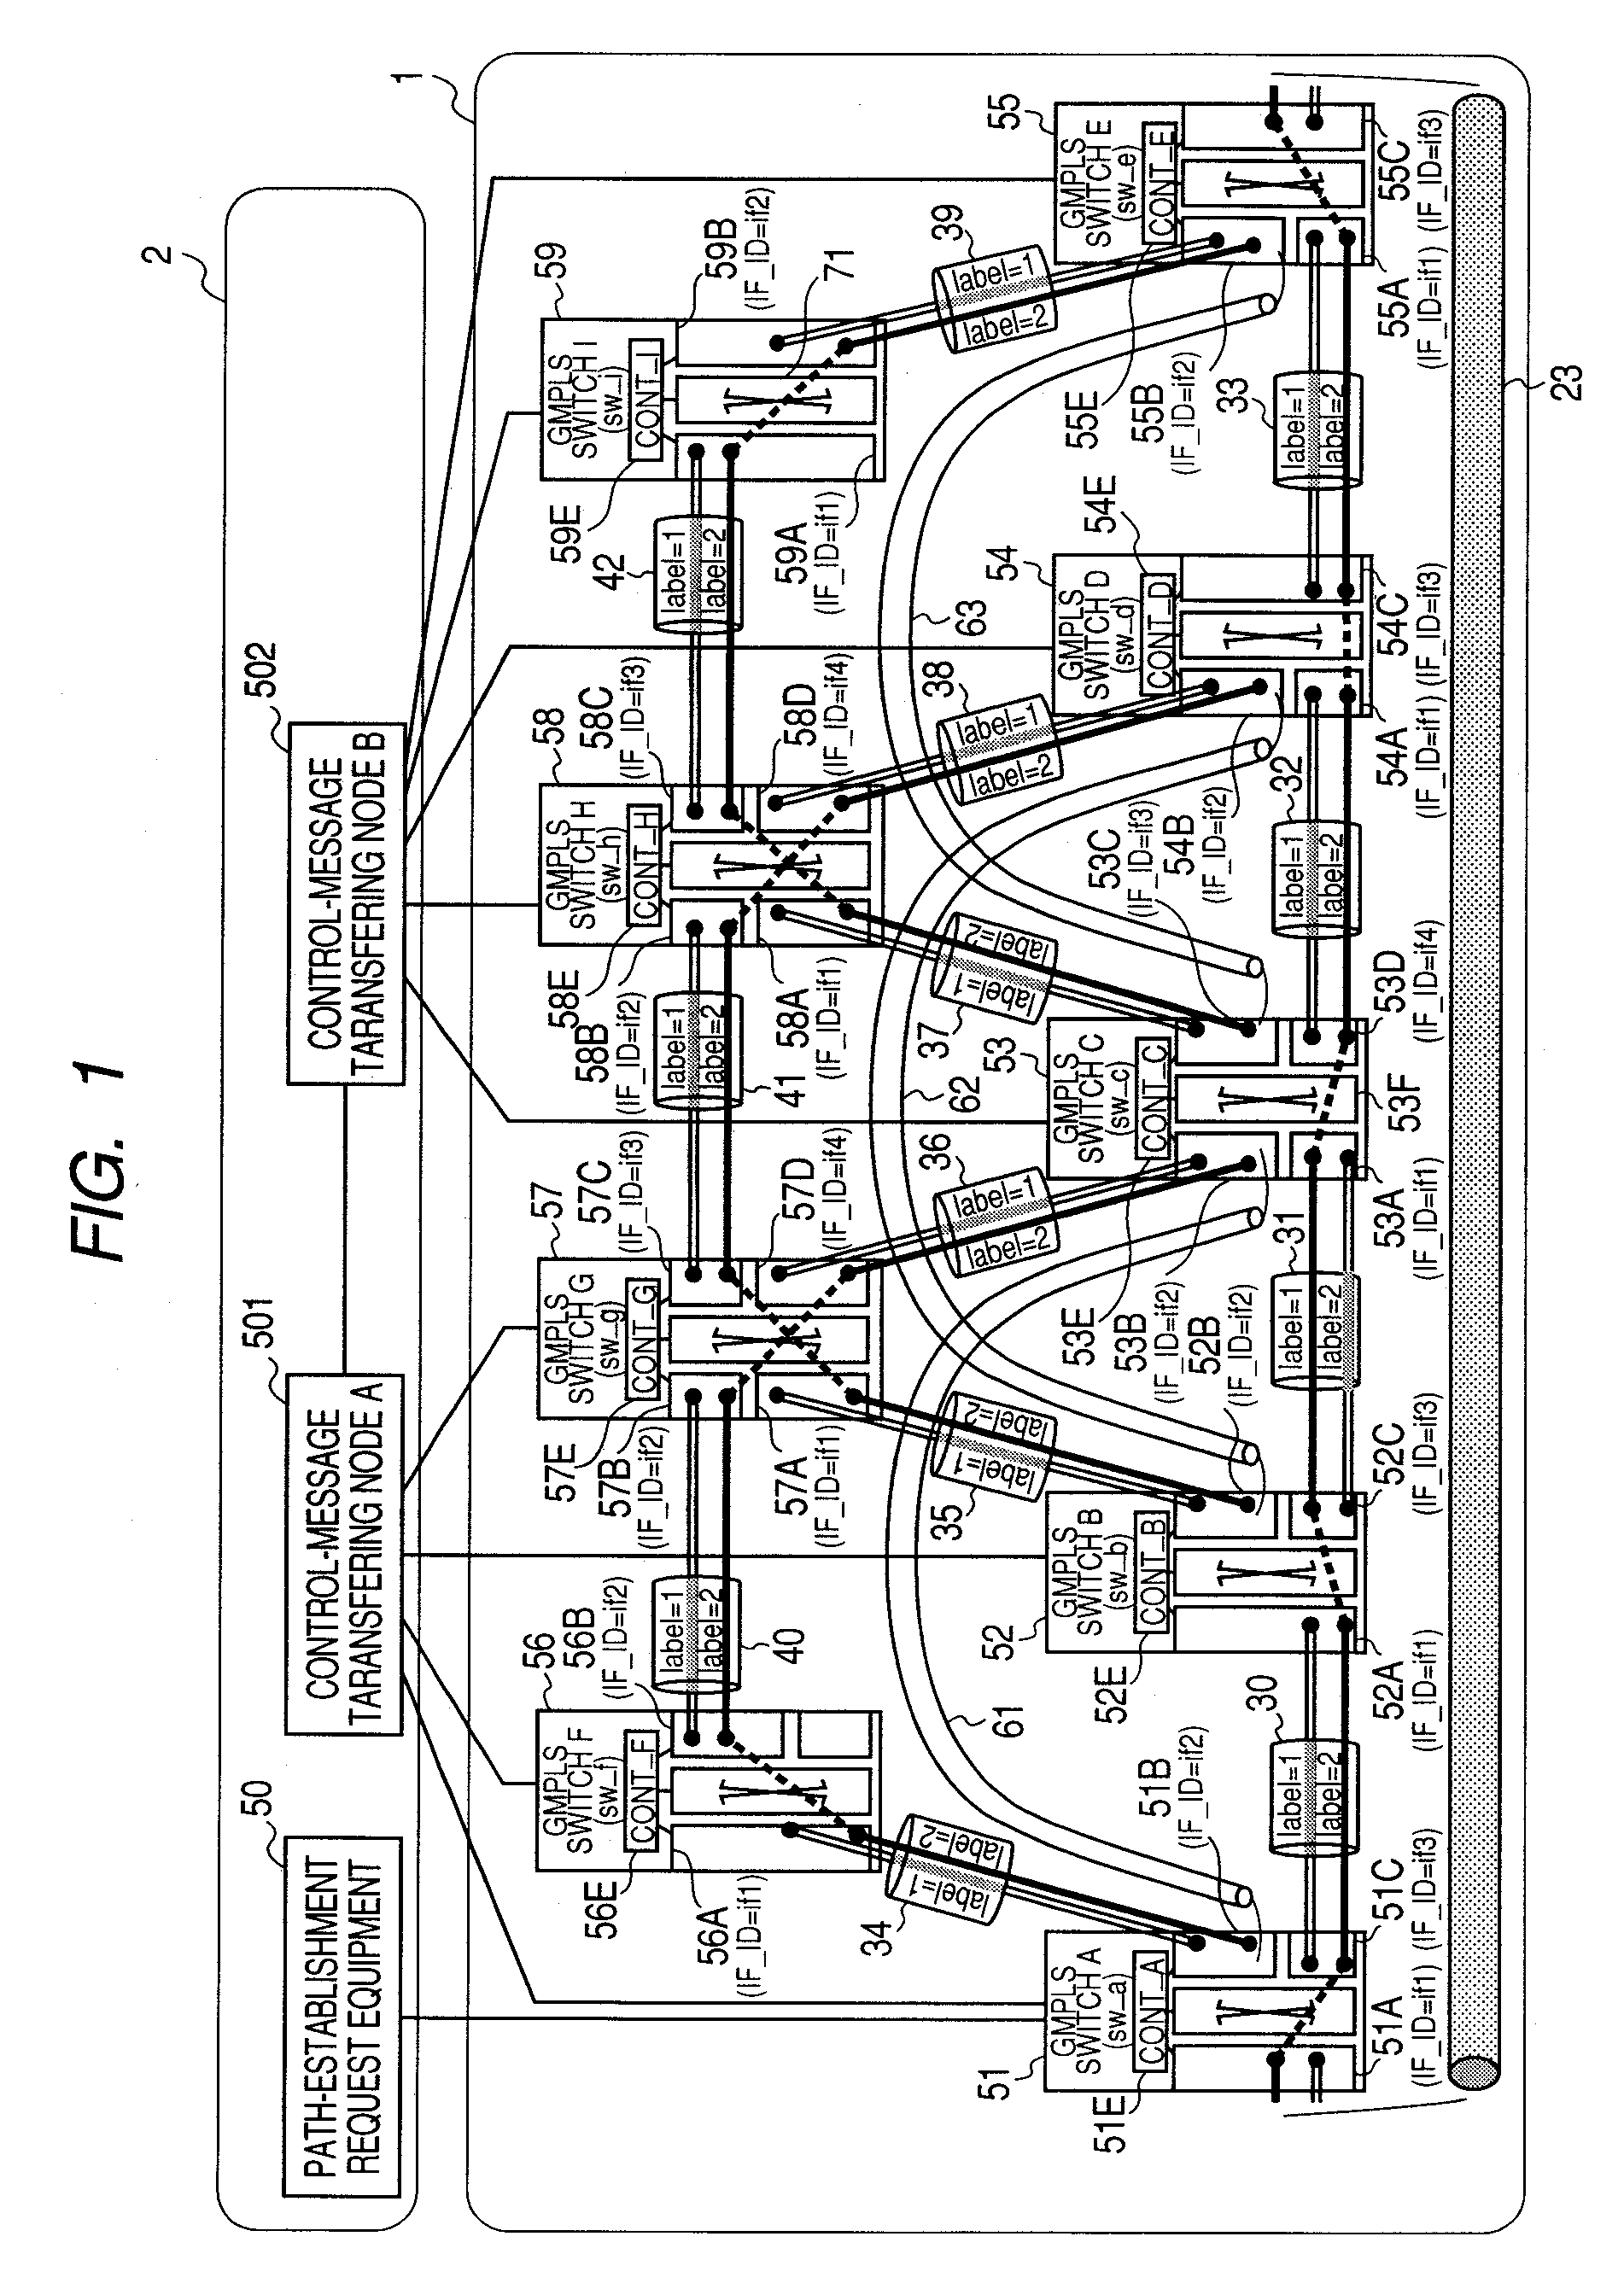 Routing failure recovery mechanism for network systems